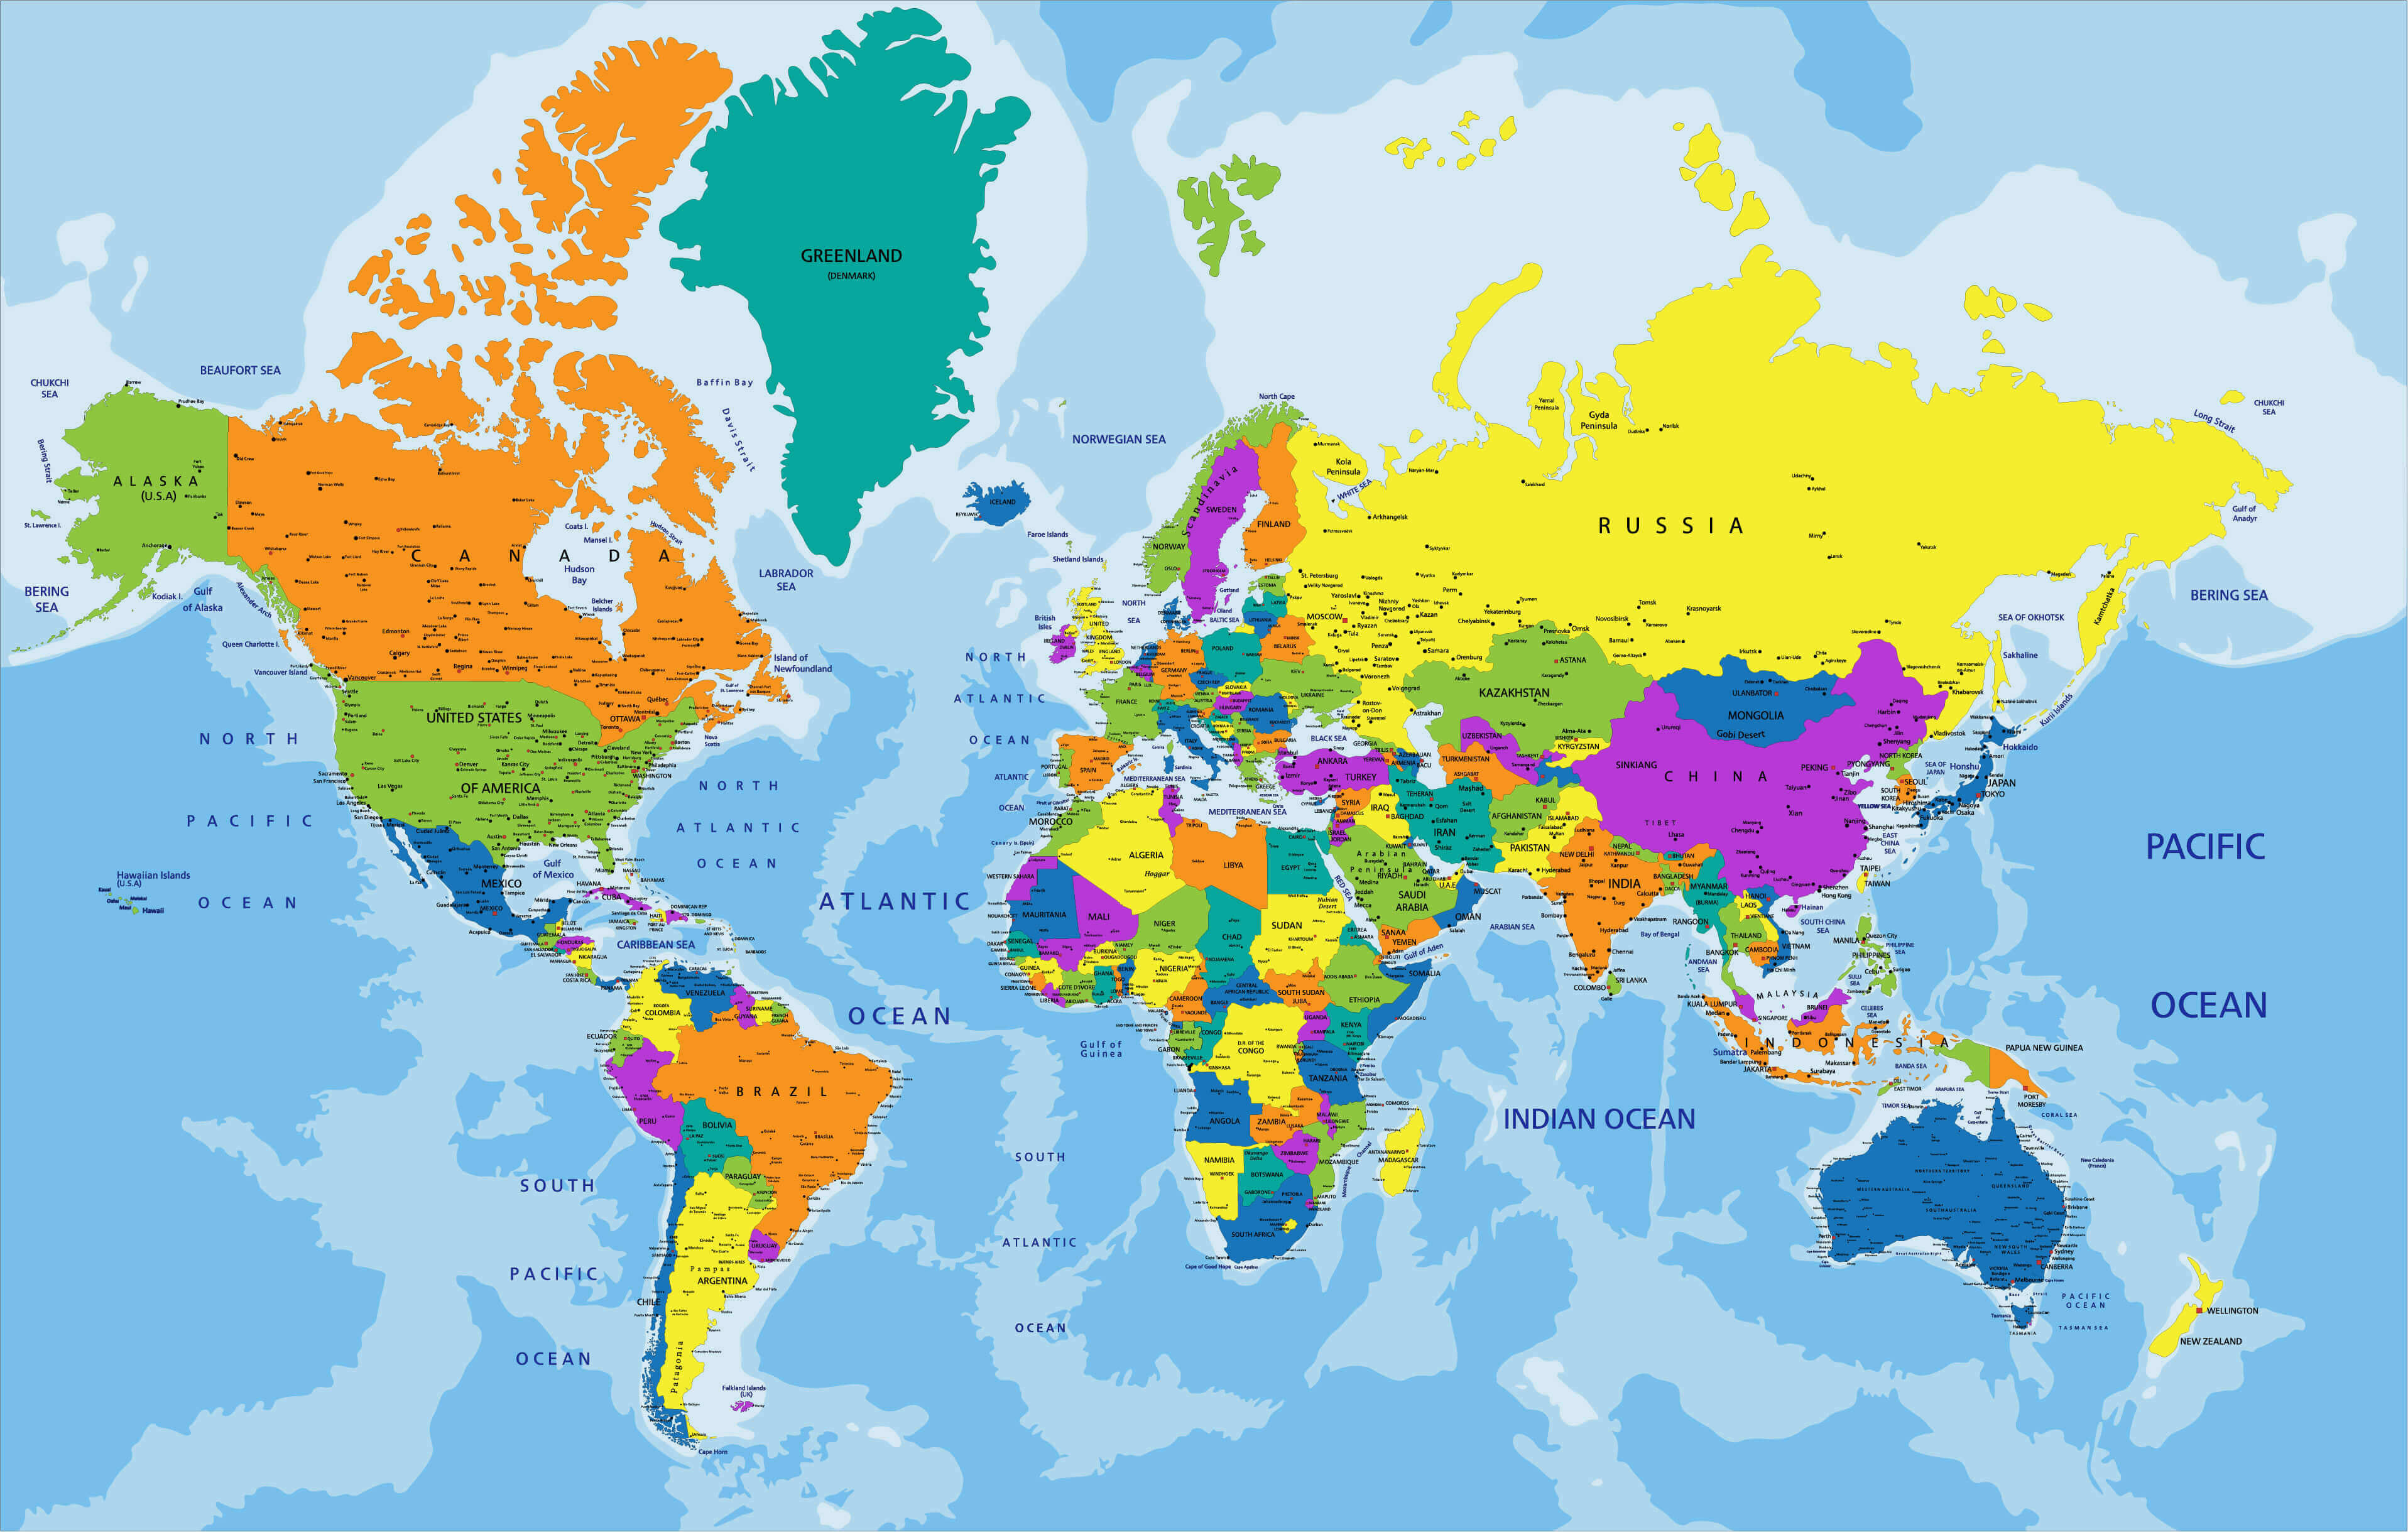 World Countries Political Map and Oceania.